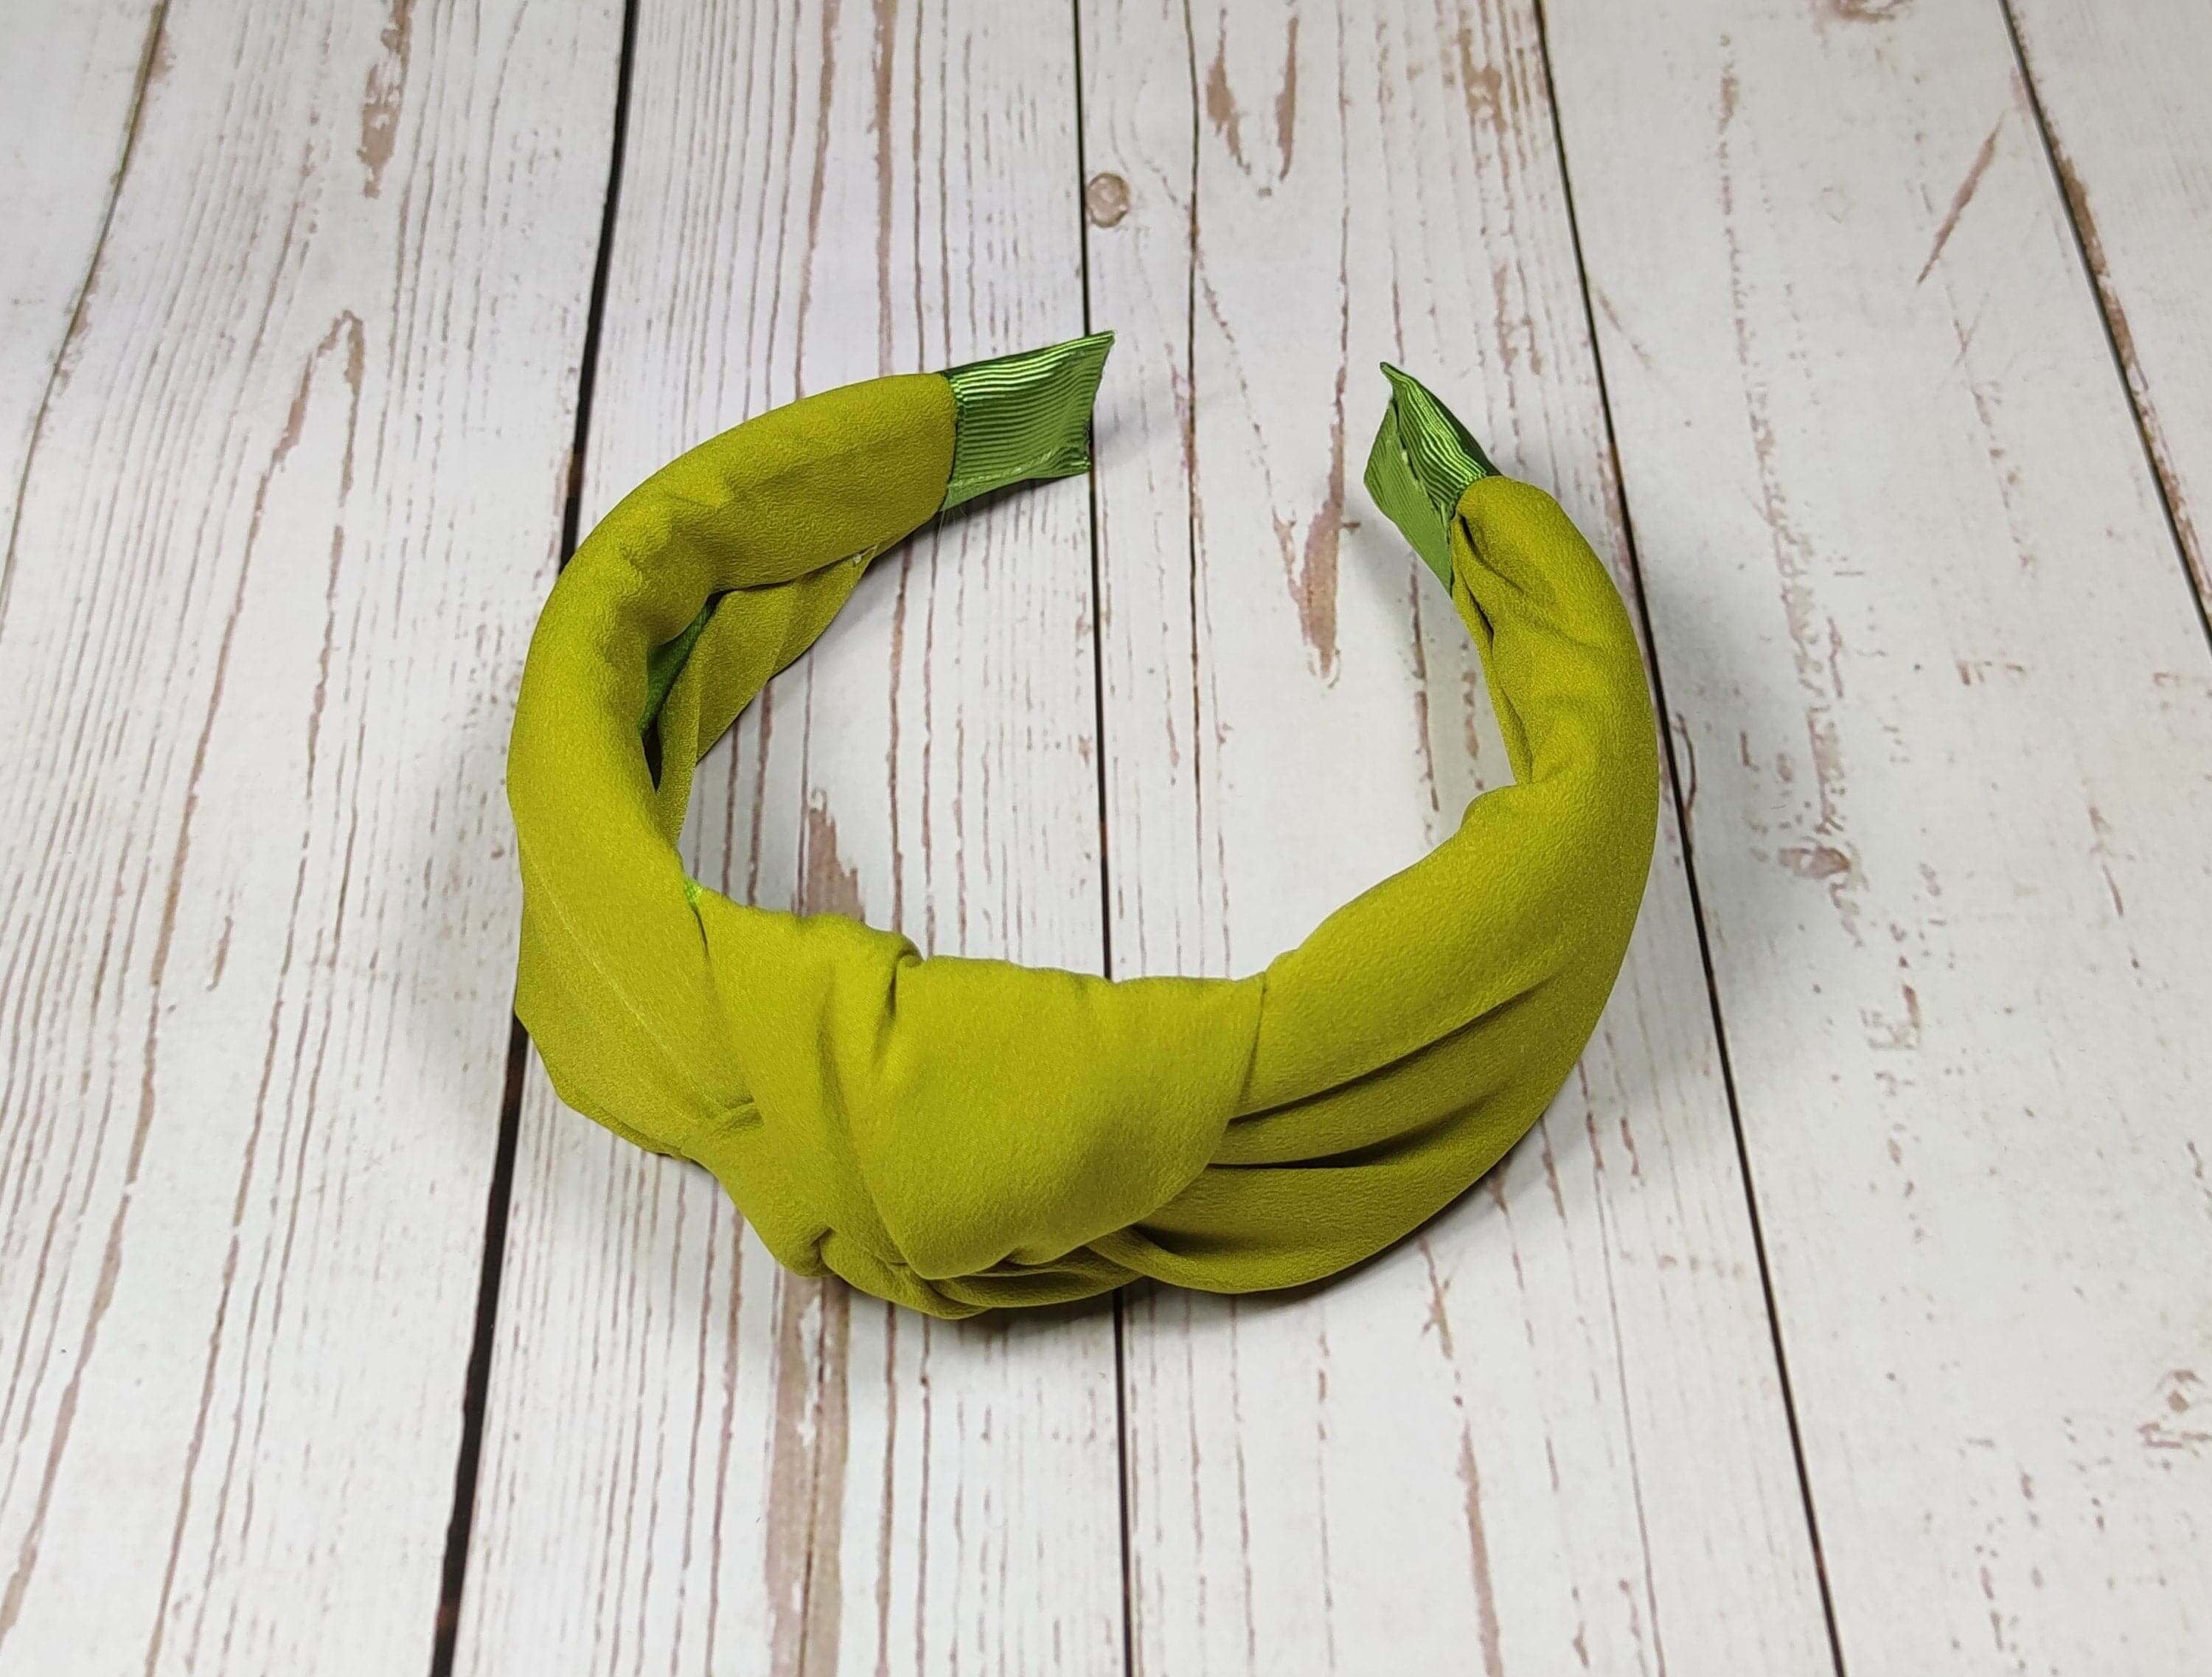 Stay stylish and comfortable all day long with this wide headband made from a soft and elastic cotton fabric. It is perfect for adding some extra style to any outfit.